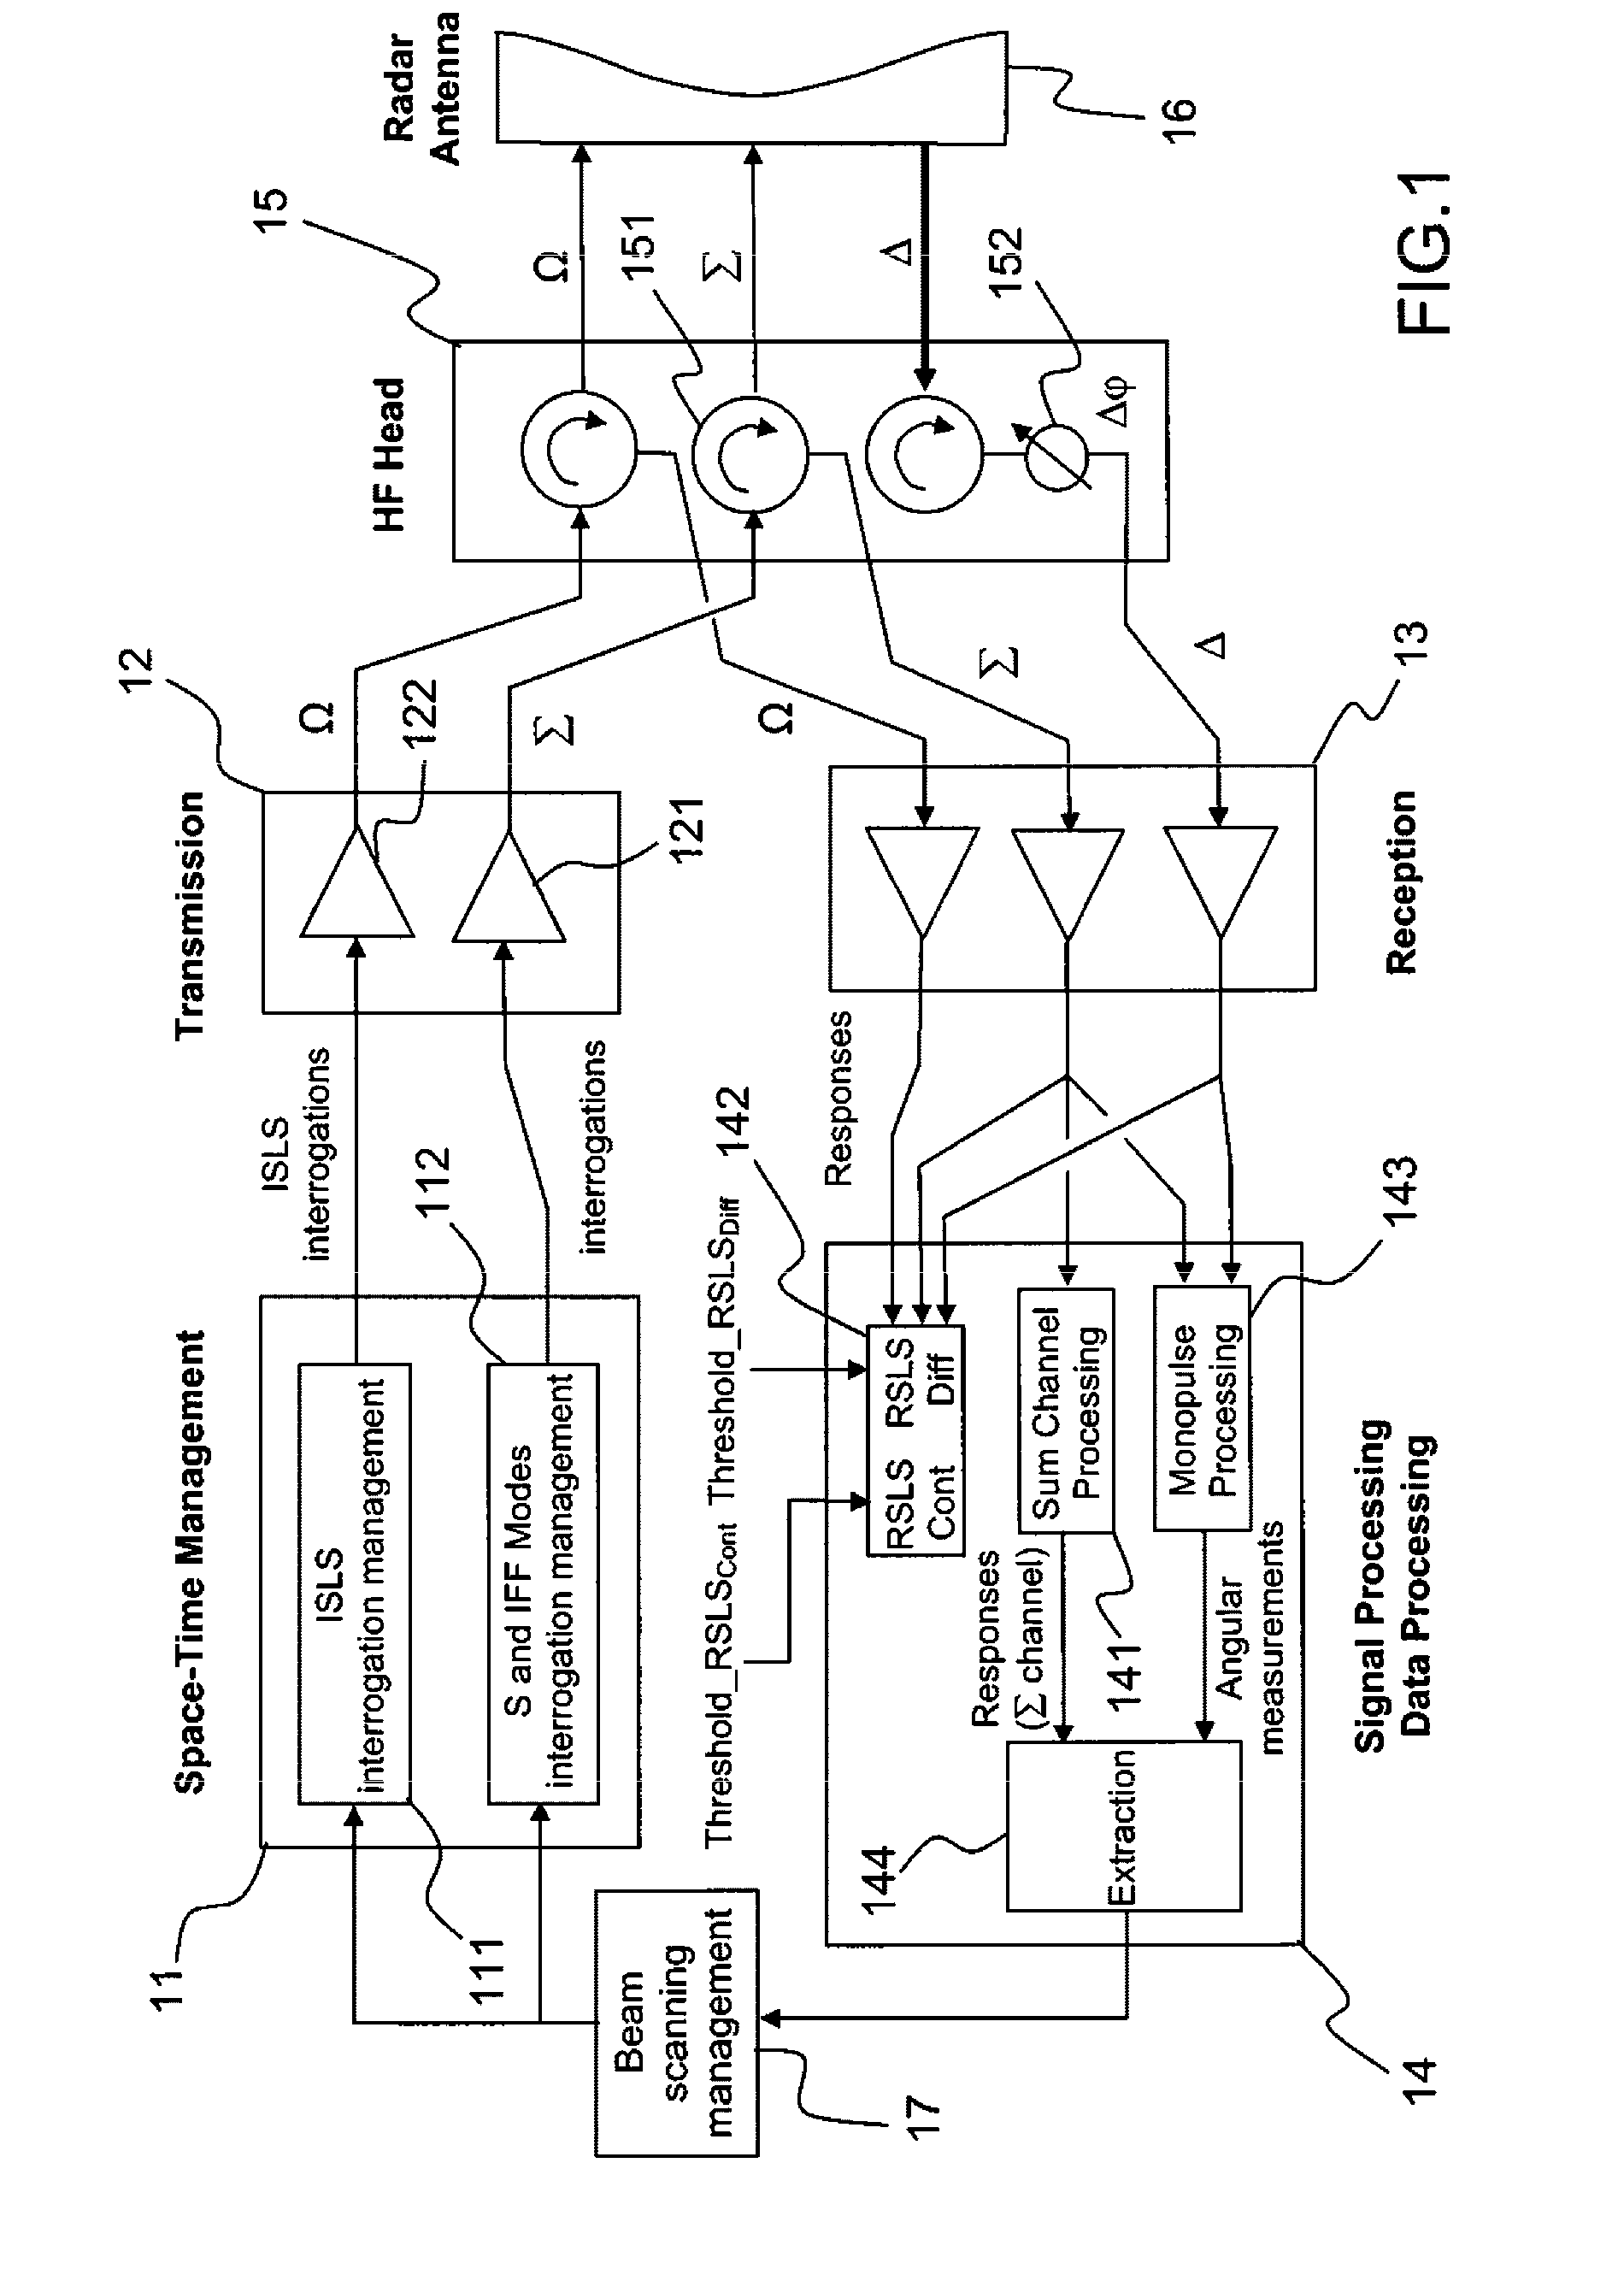 Method for Increasing the Time for Illumination of Targets by a Secondary Surveillance Radar